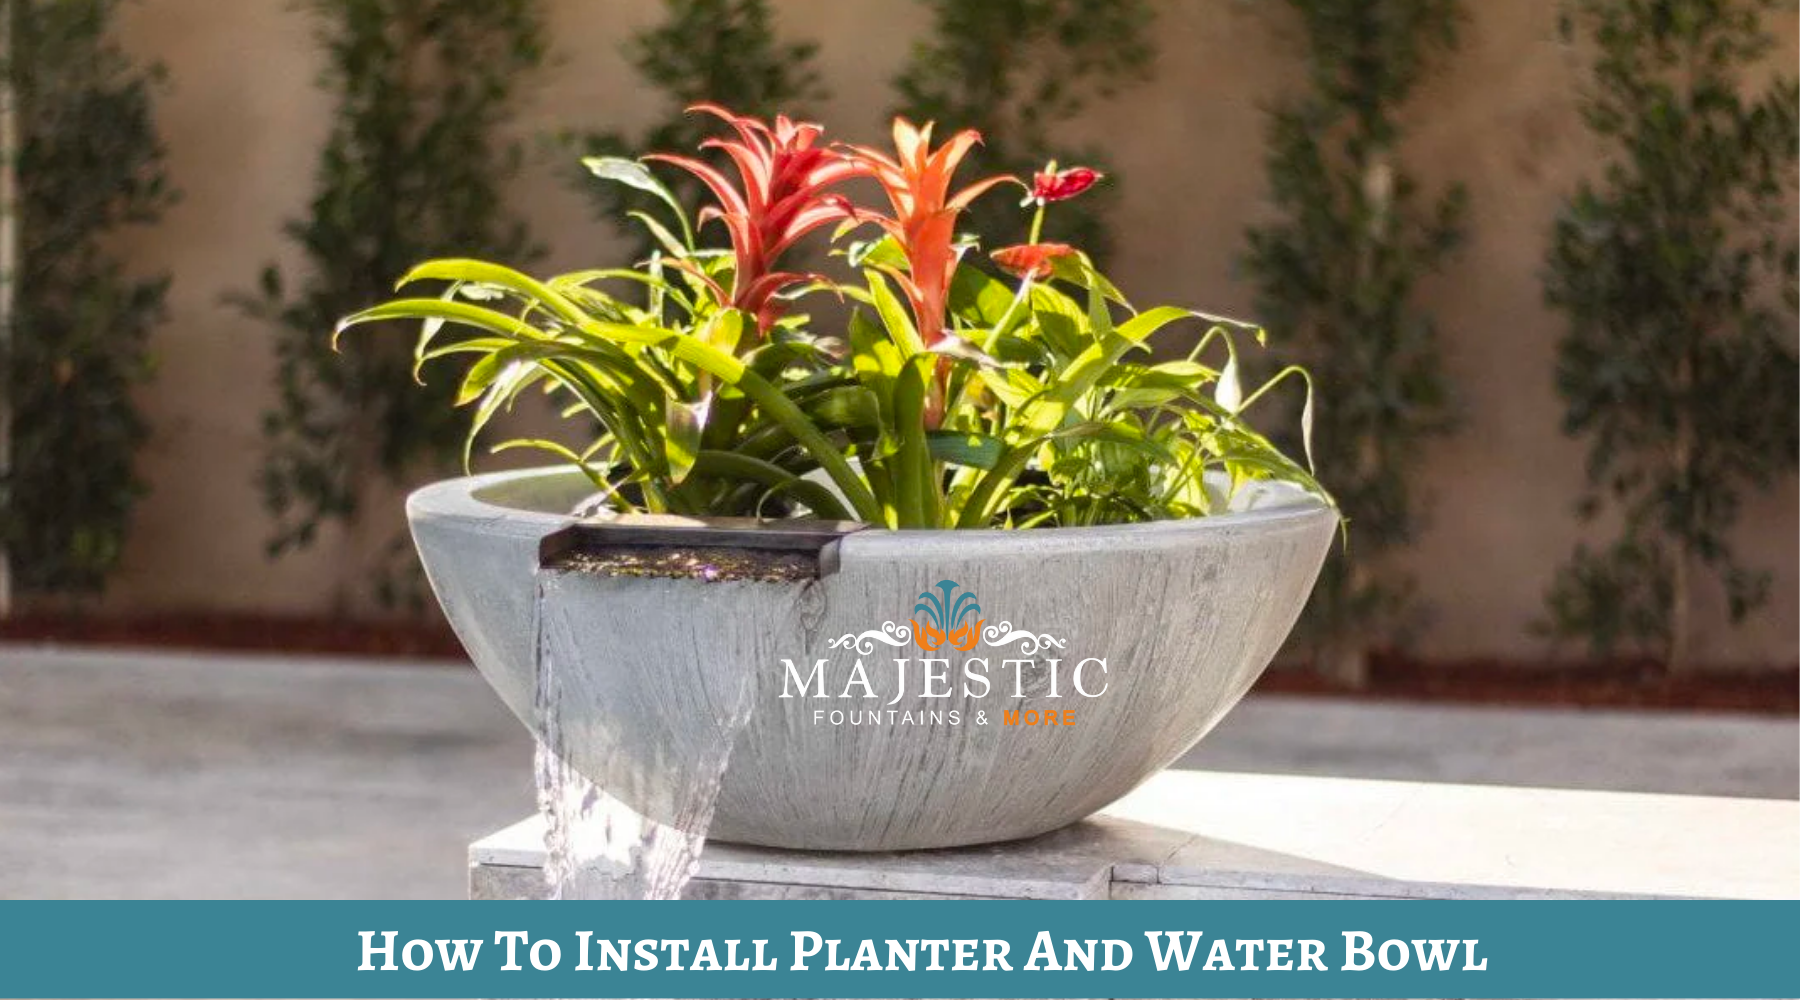 How To Install Planter And Water Bowl